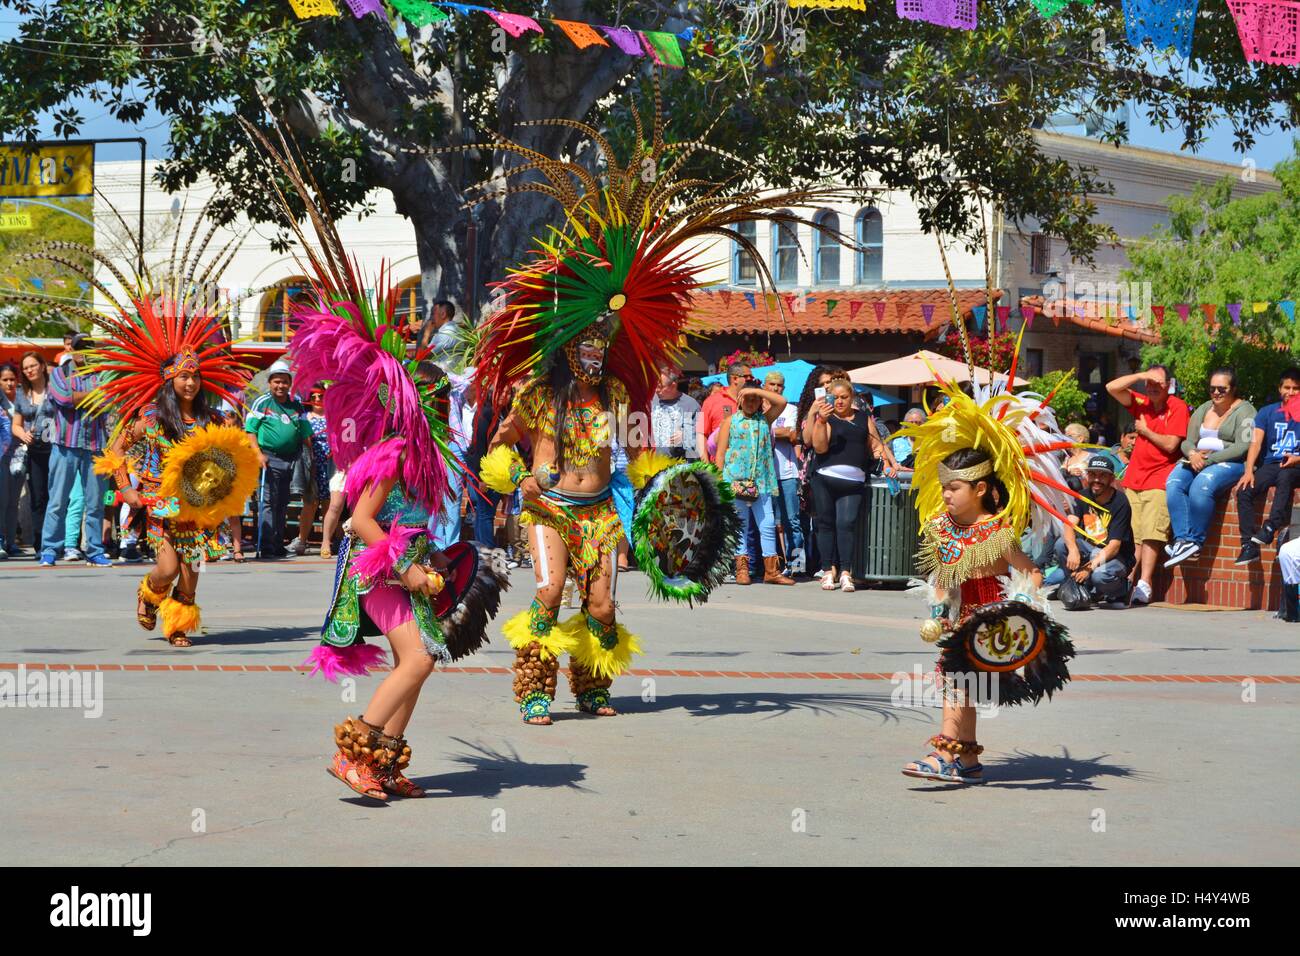 Native American Dancers, performers, performing 'Blessing of the Animals',Olvera Street, Los Angeles,California,USA Stock Photo